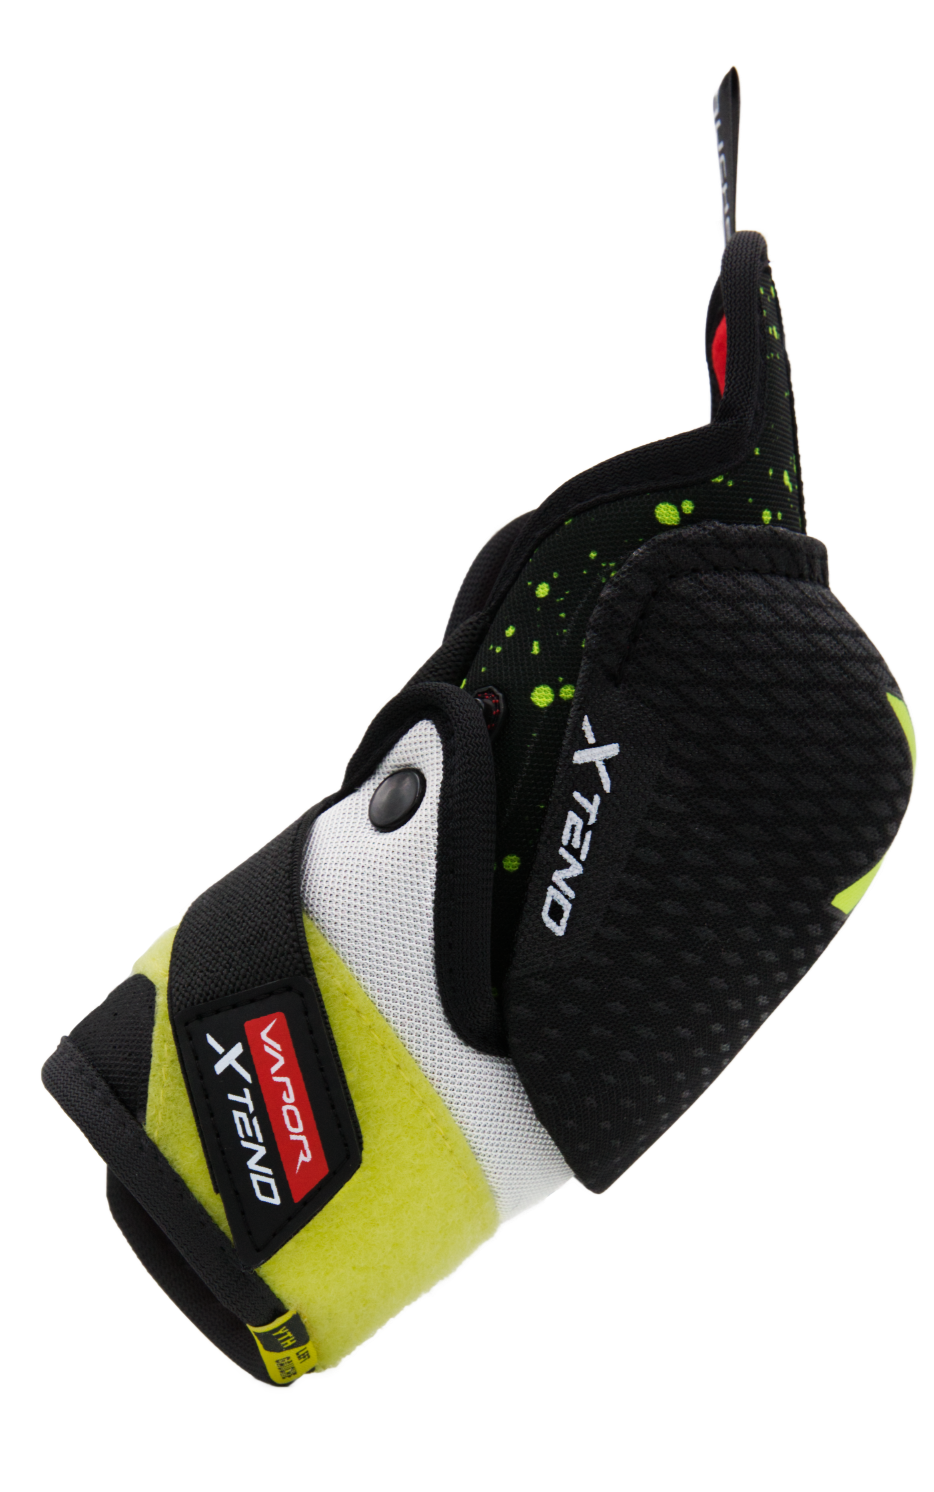 Bauer Vapor Xtend Youth Protective Kit